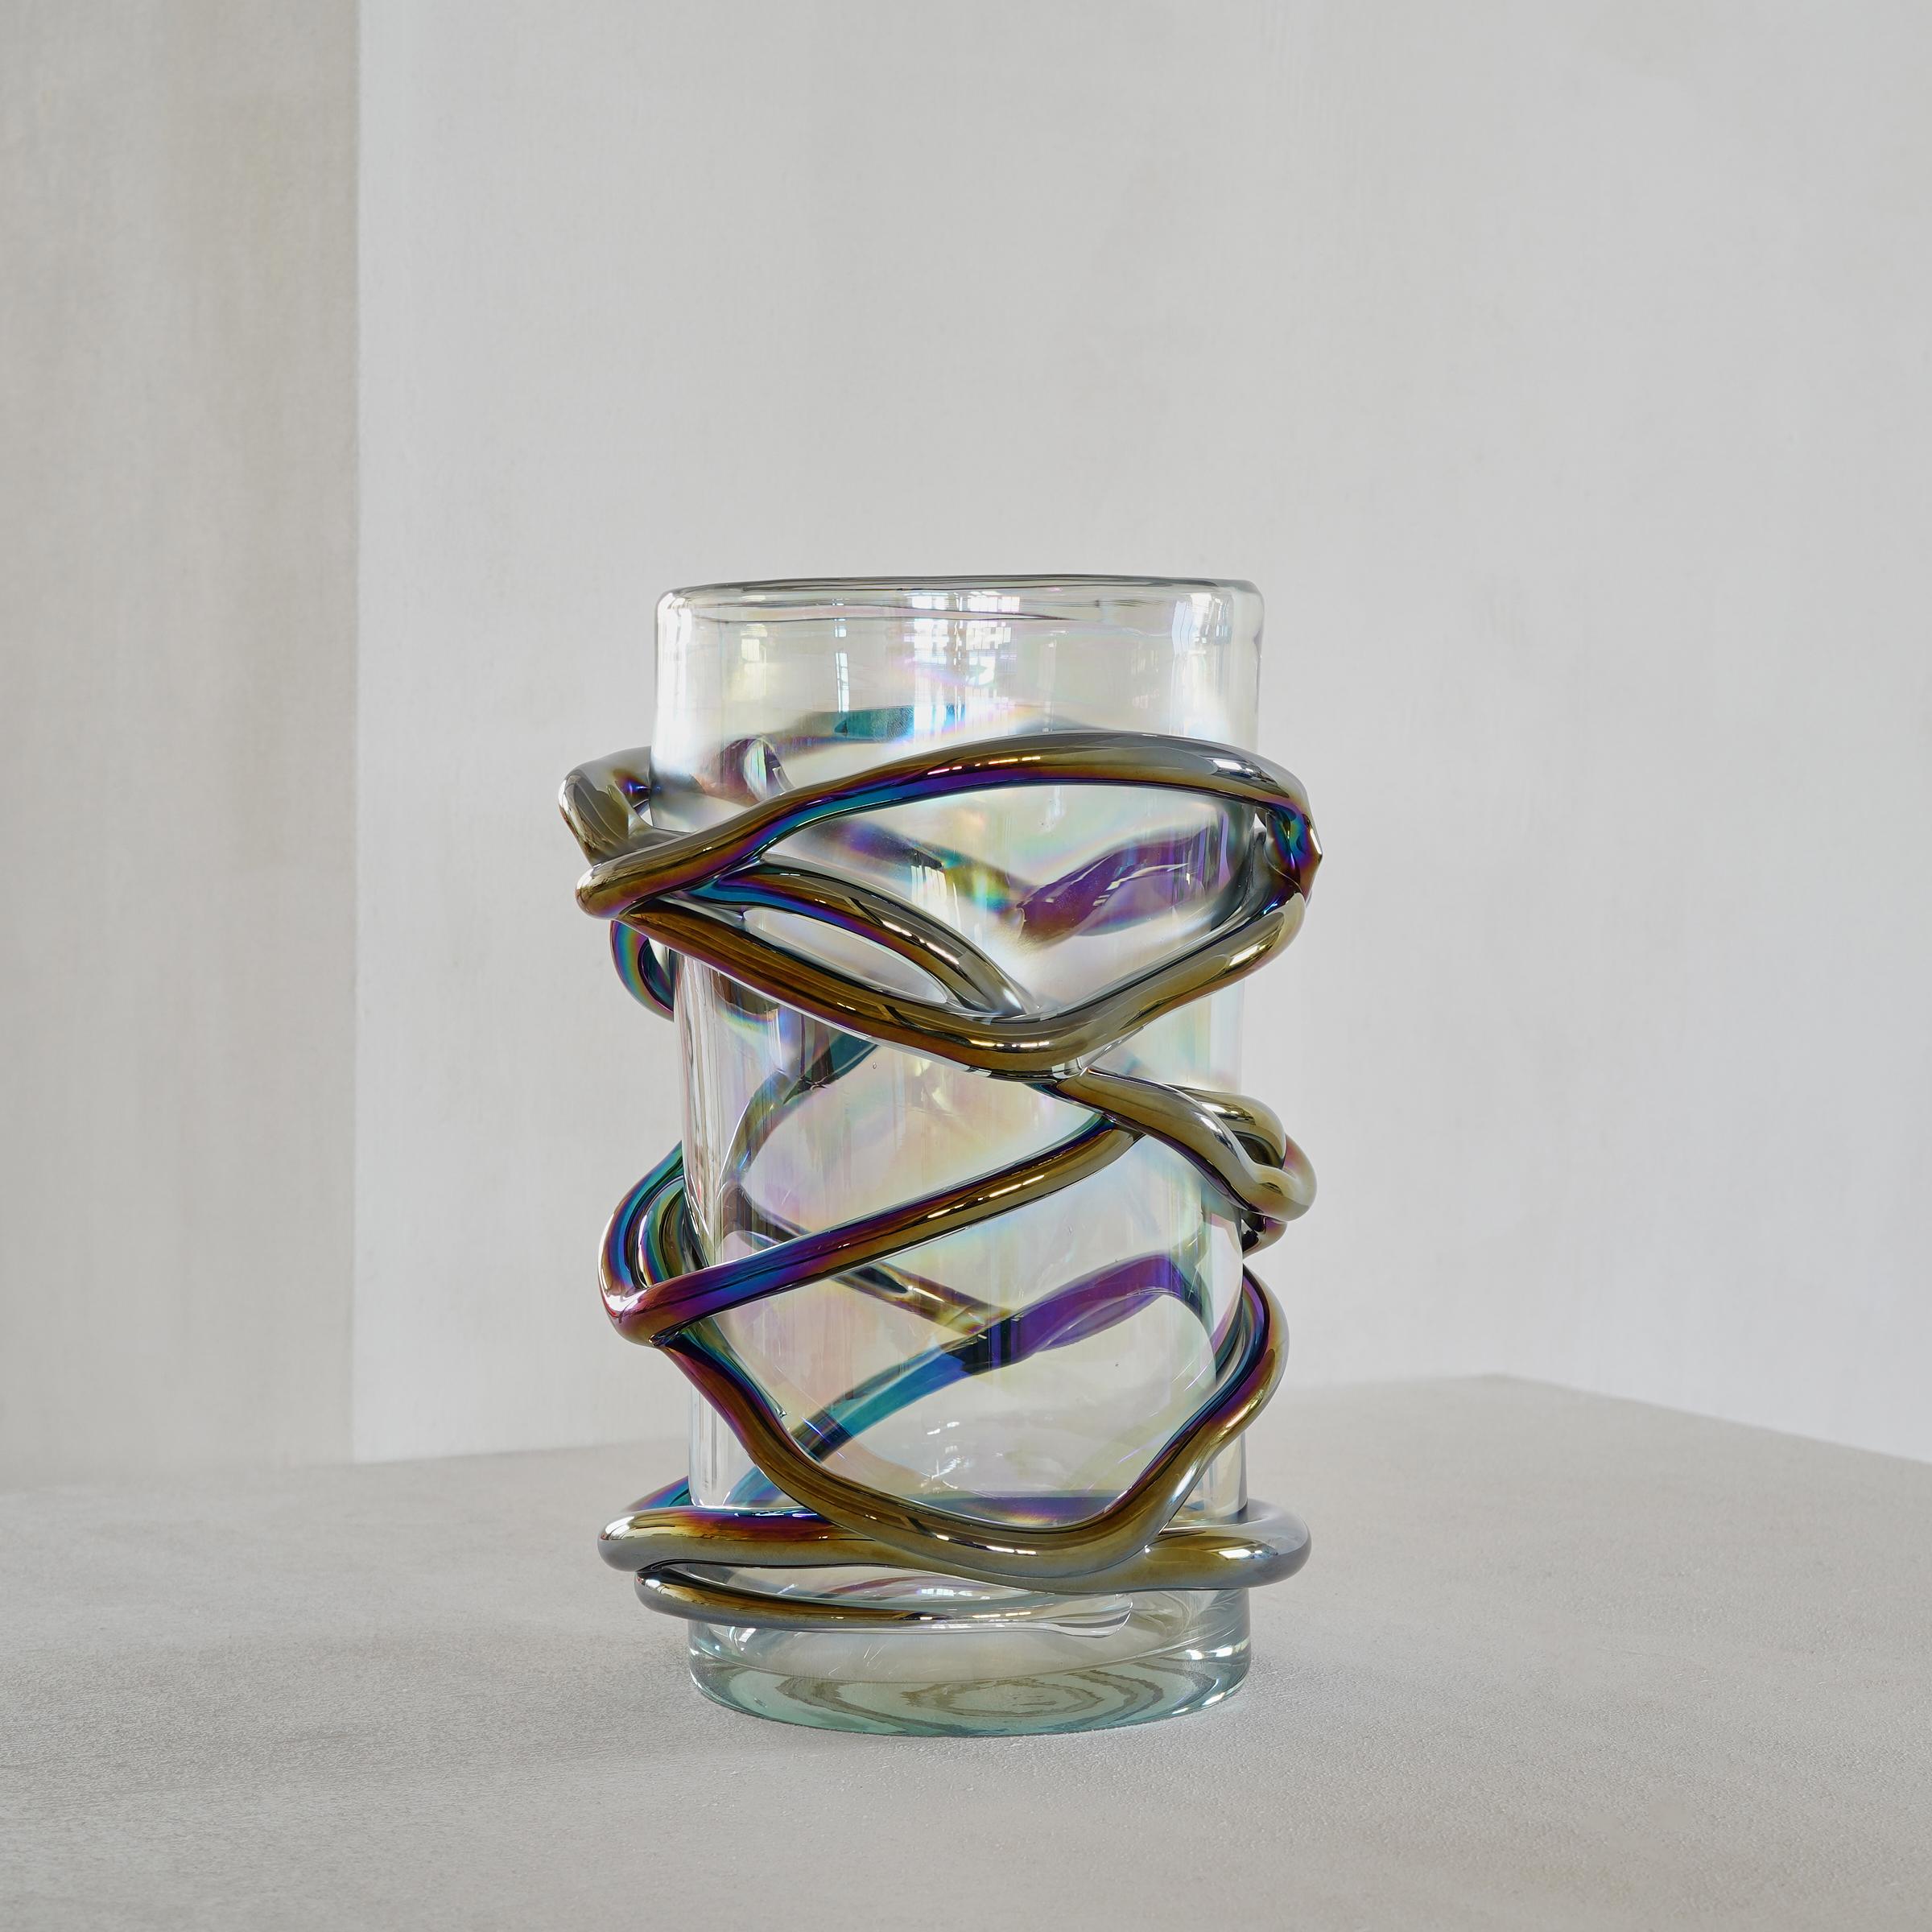 This is a very unique and playfully designed glass vase made by a skilled Murano glass workshop in Venice Italy.
 
There is a fantastic iridescent finish on the glass strokes that are playfully embracing the clear glass. The result is a real